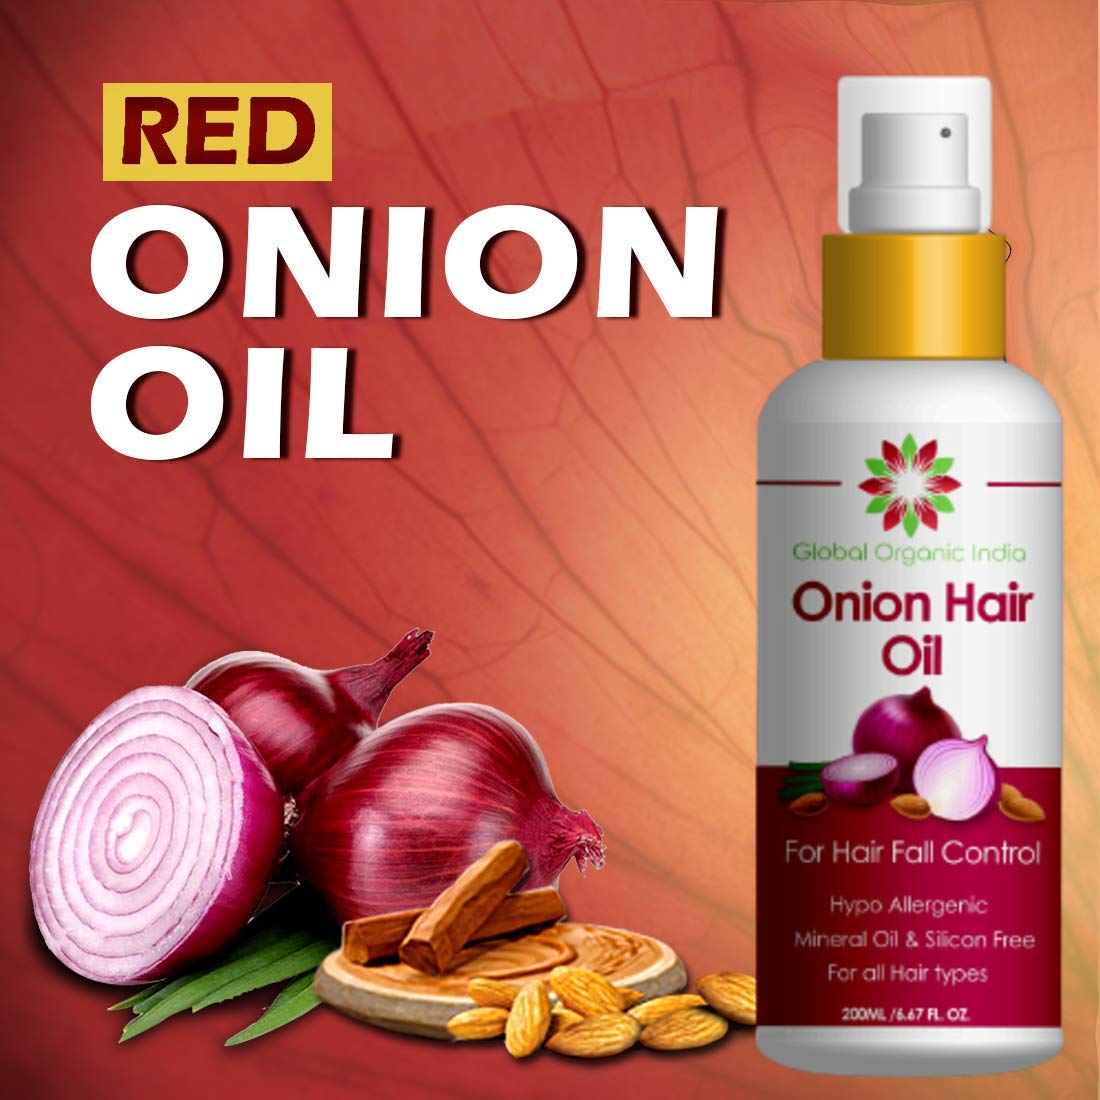 global organic india onion oil with black seed oil in purest form very  effectively control hair loss, promotes hair growth 100% natural 200 ML 